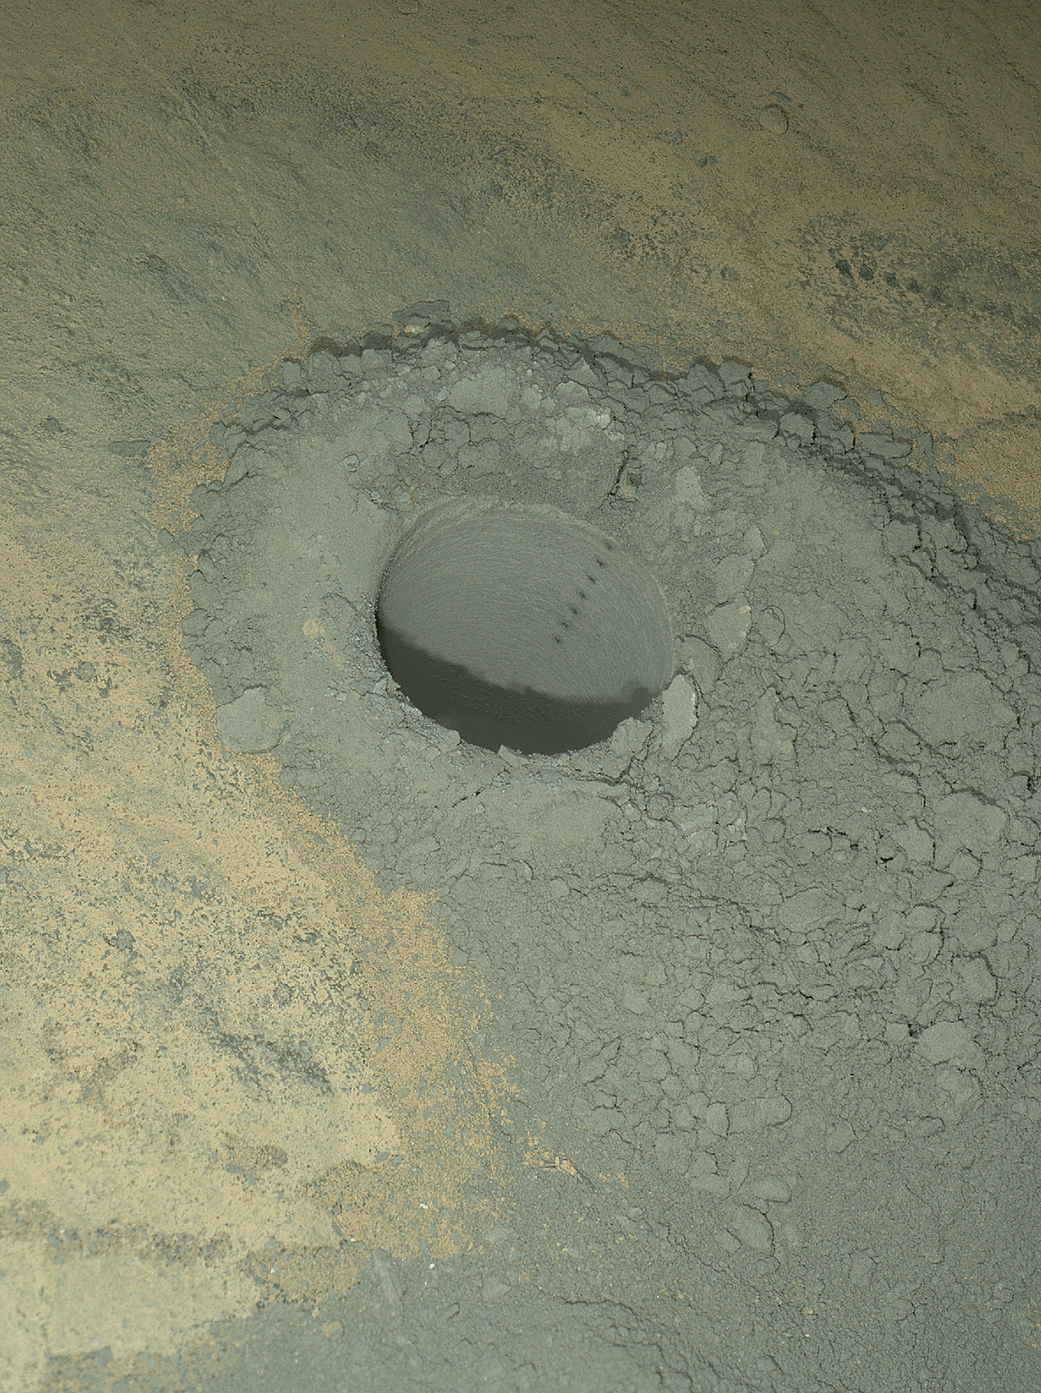 The Mars Hand Lens Imager on NASA's Curiosity Mars rover provided this nighttime view of a hole